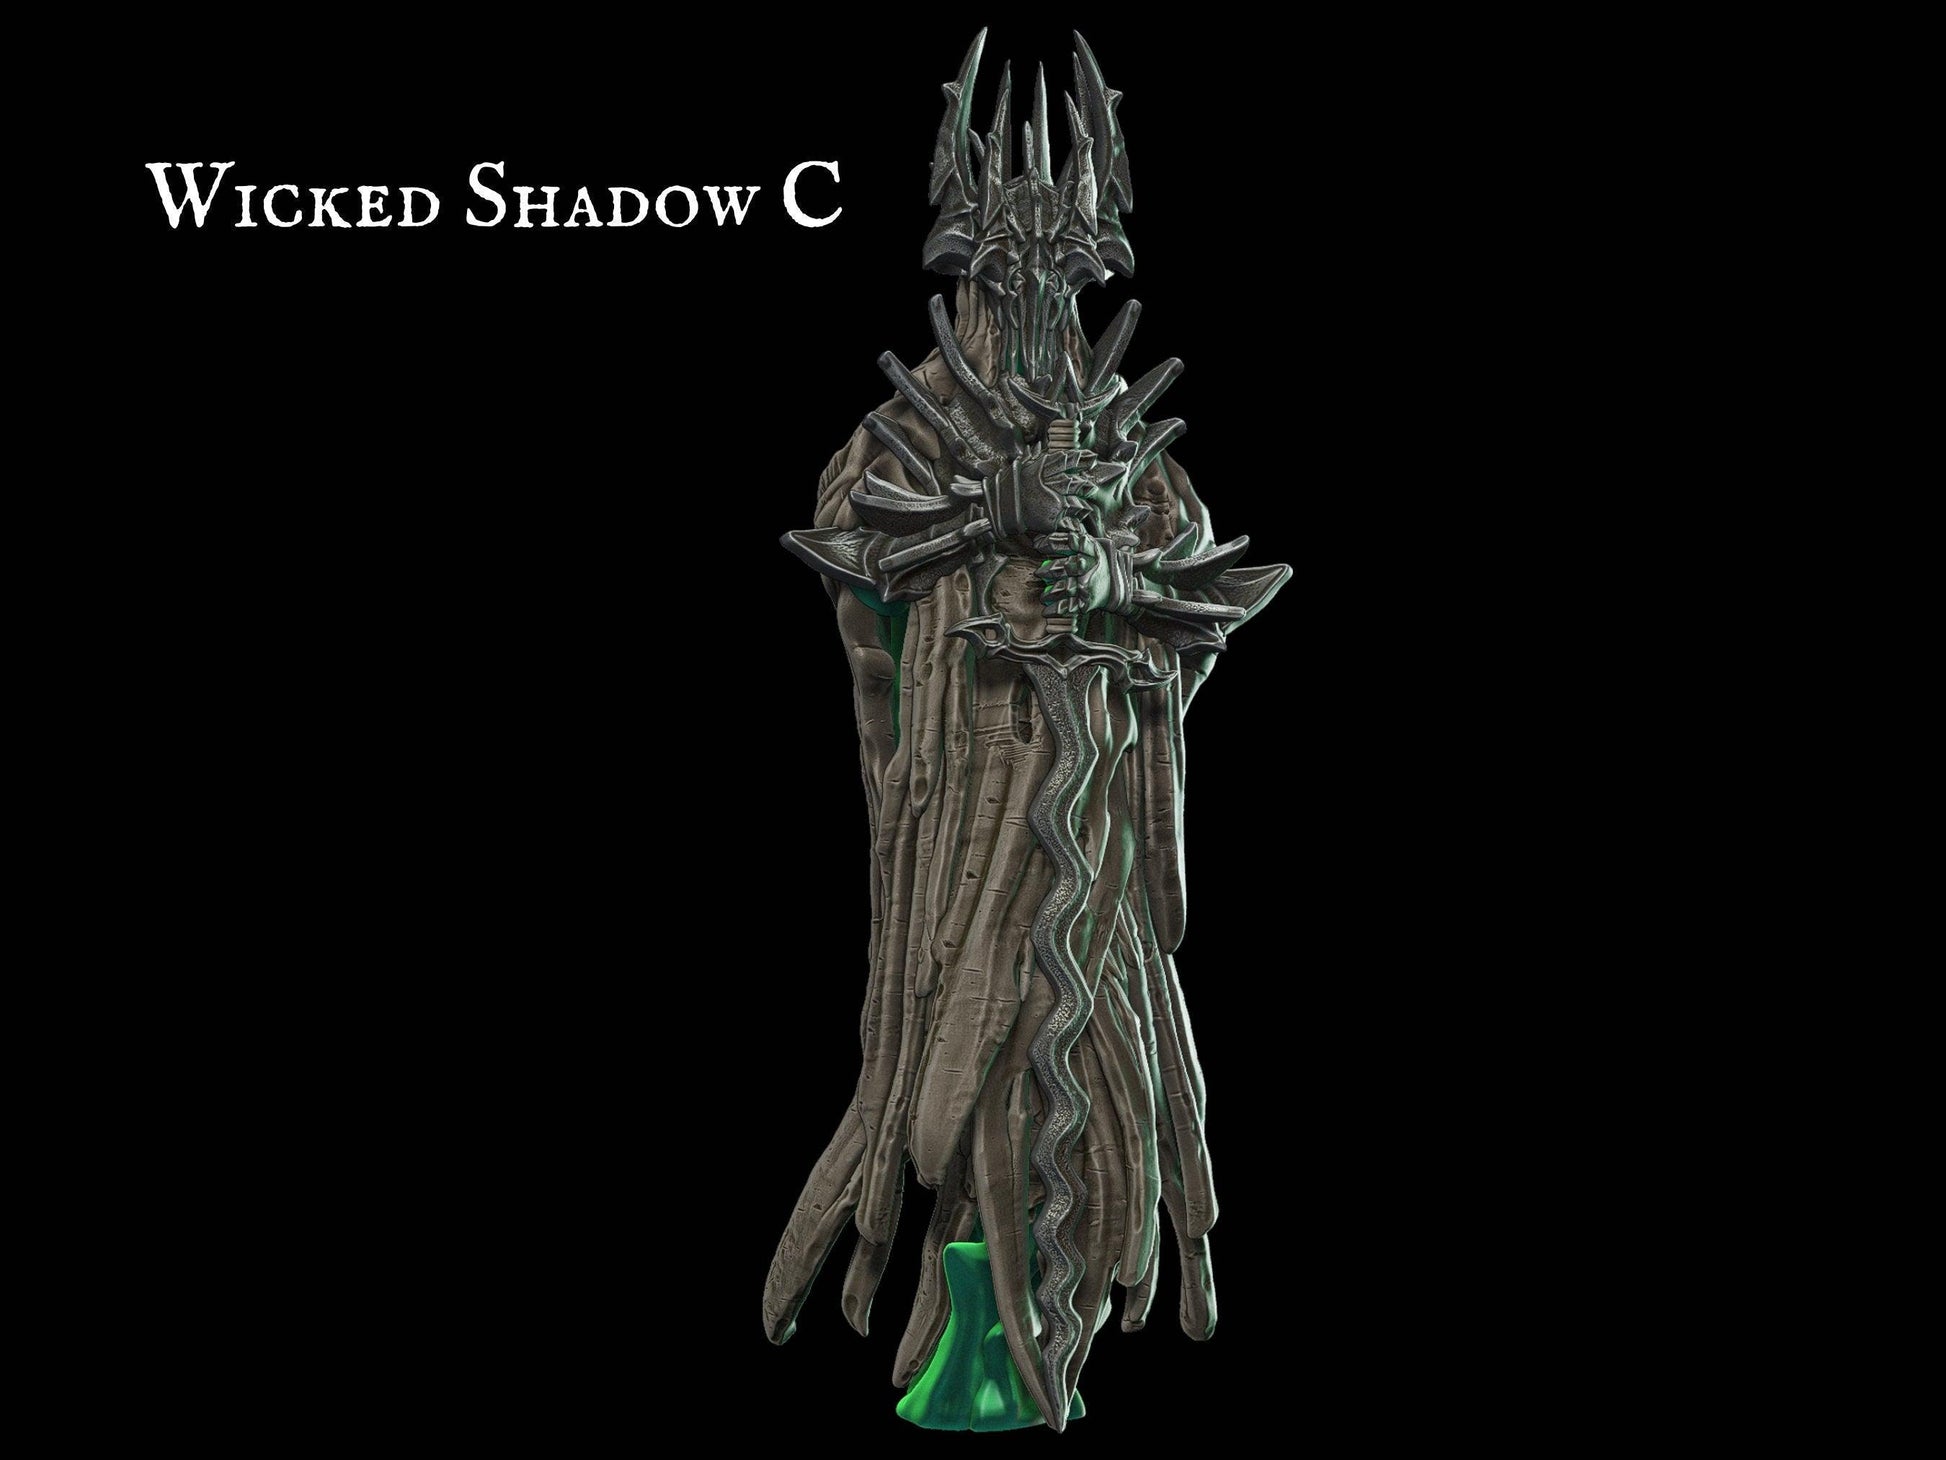 Wicked Shadow Miniature - 28mm scale Tabletop gaming DnD Miniature Dungeons and Dragons dnd 5e dungeon master gift - Plague Miniatures shop for DnD Miniatures